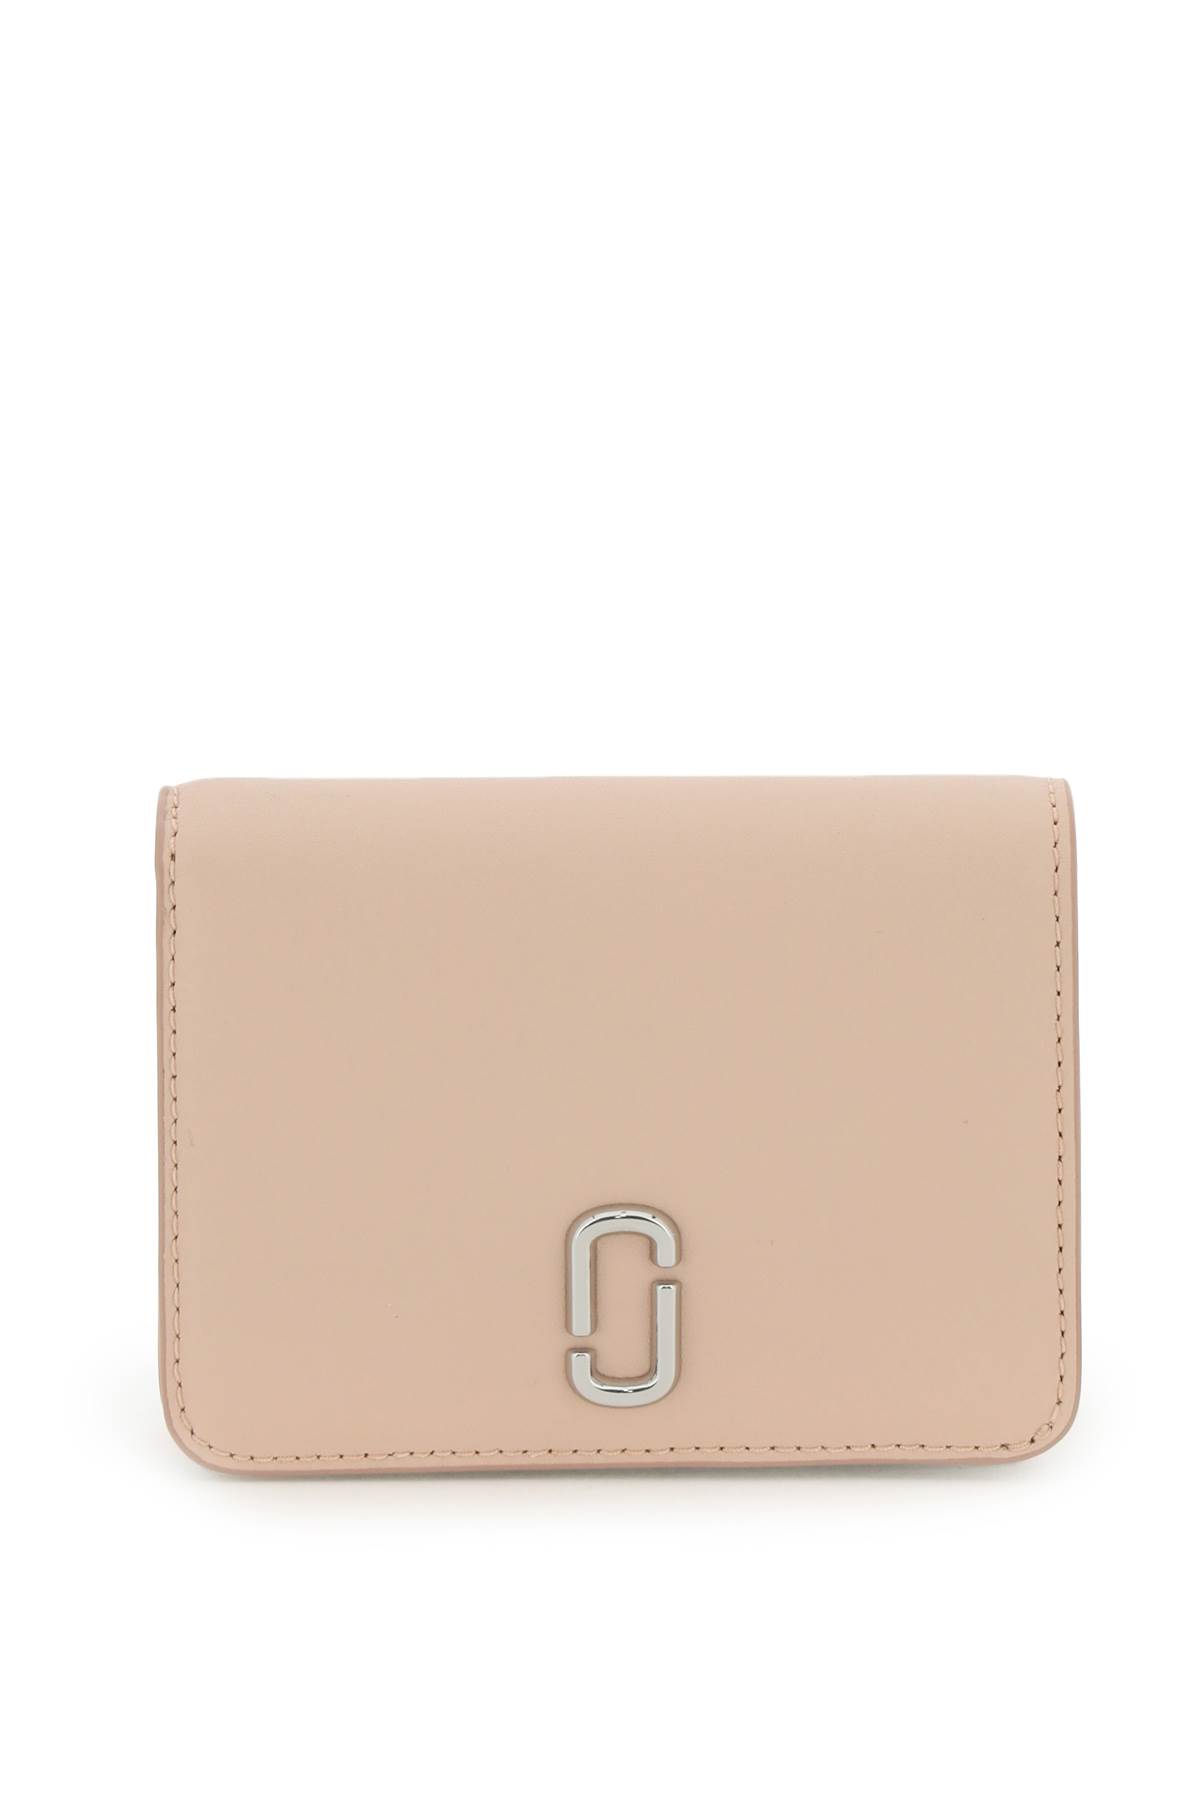 Marc Jacobs The J Marc Mini Compact Pink Wallet